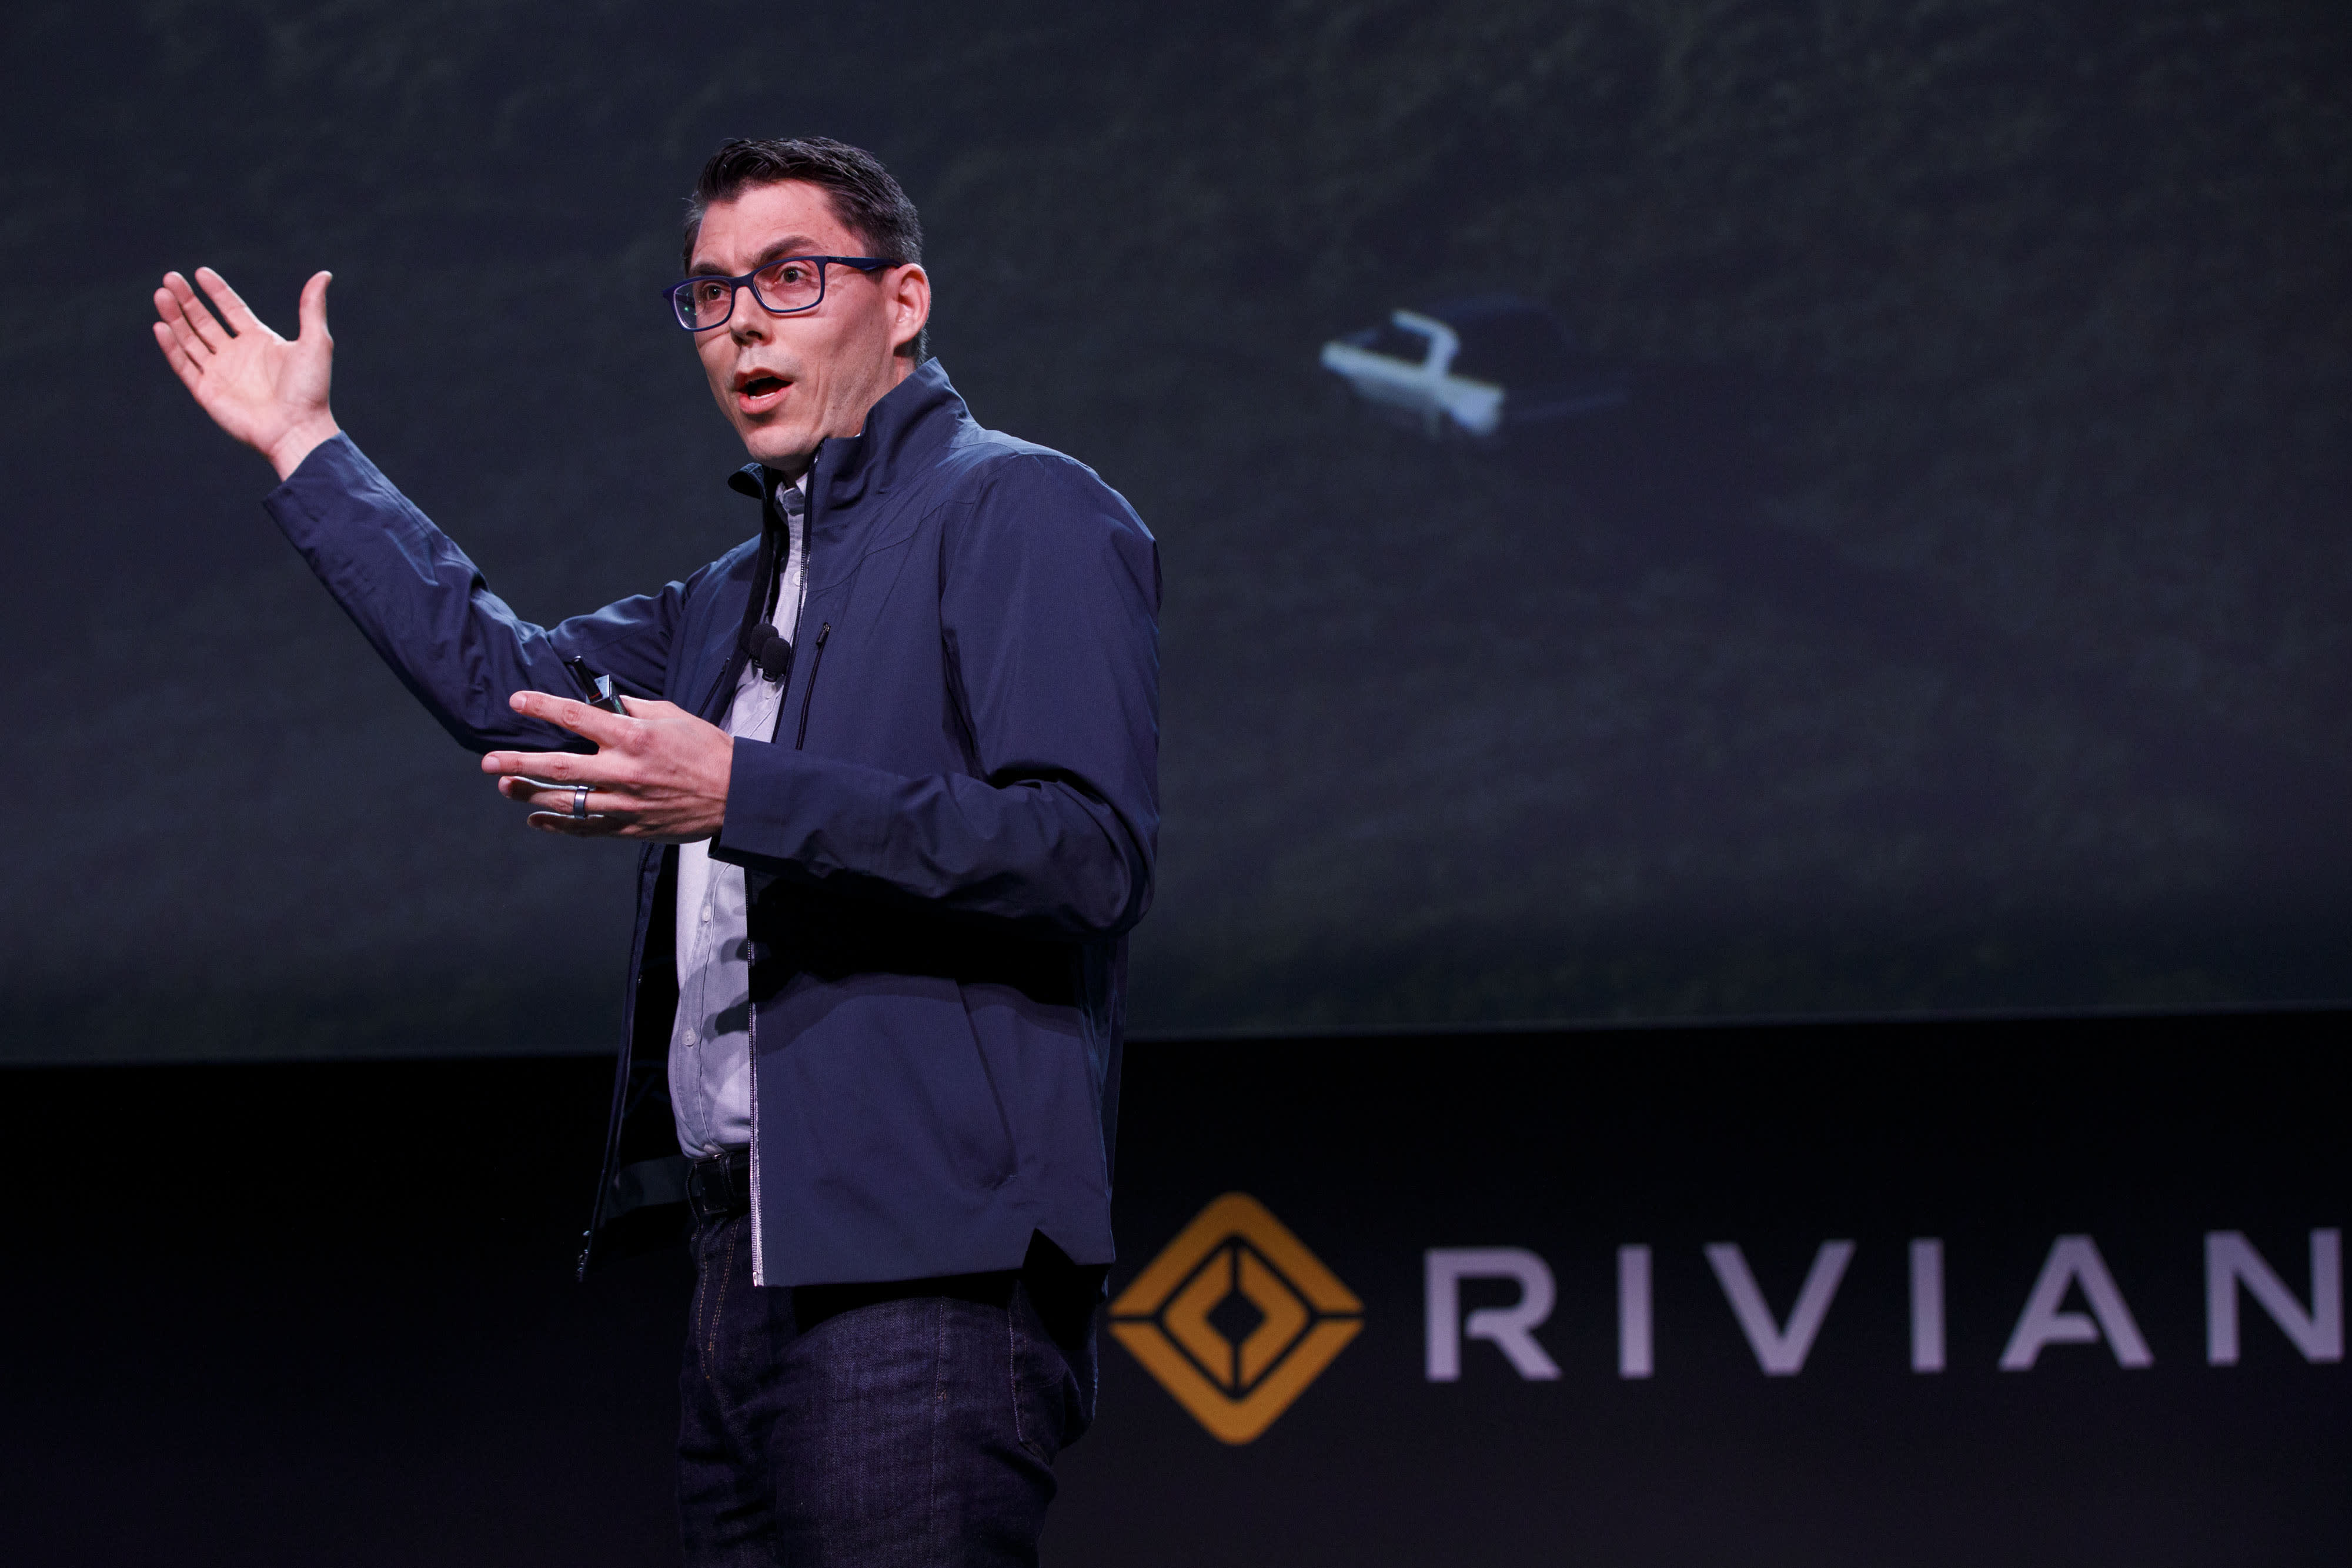 Rivian founder R.J. Scaringe is worth $2.2 billion after company’s IPO